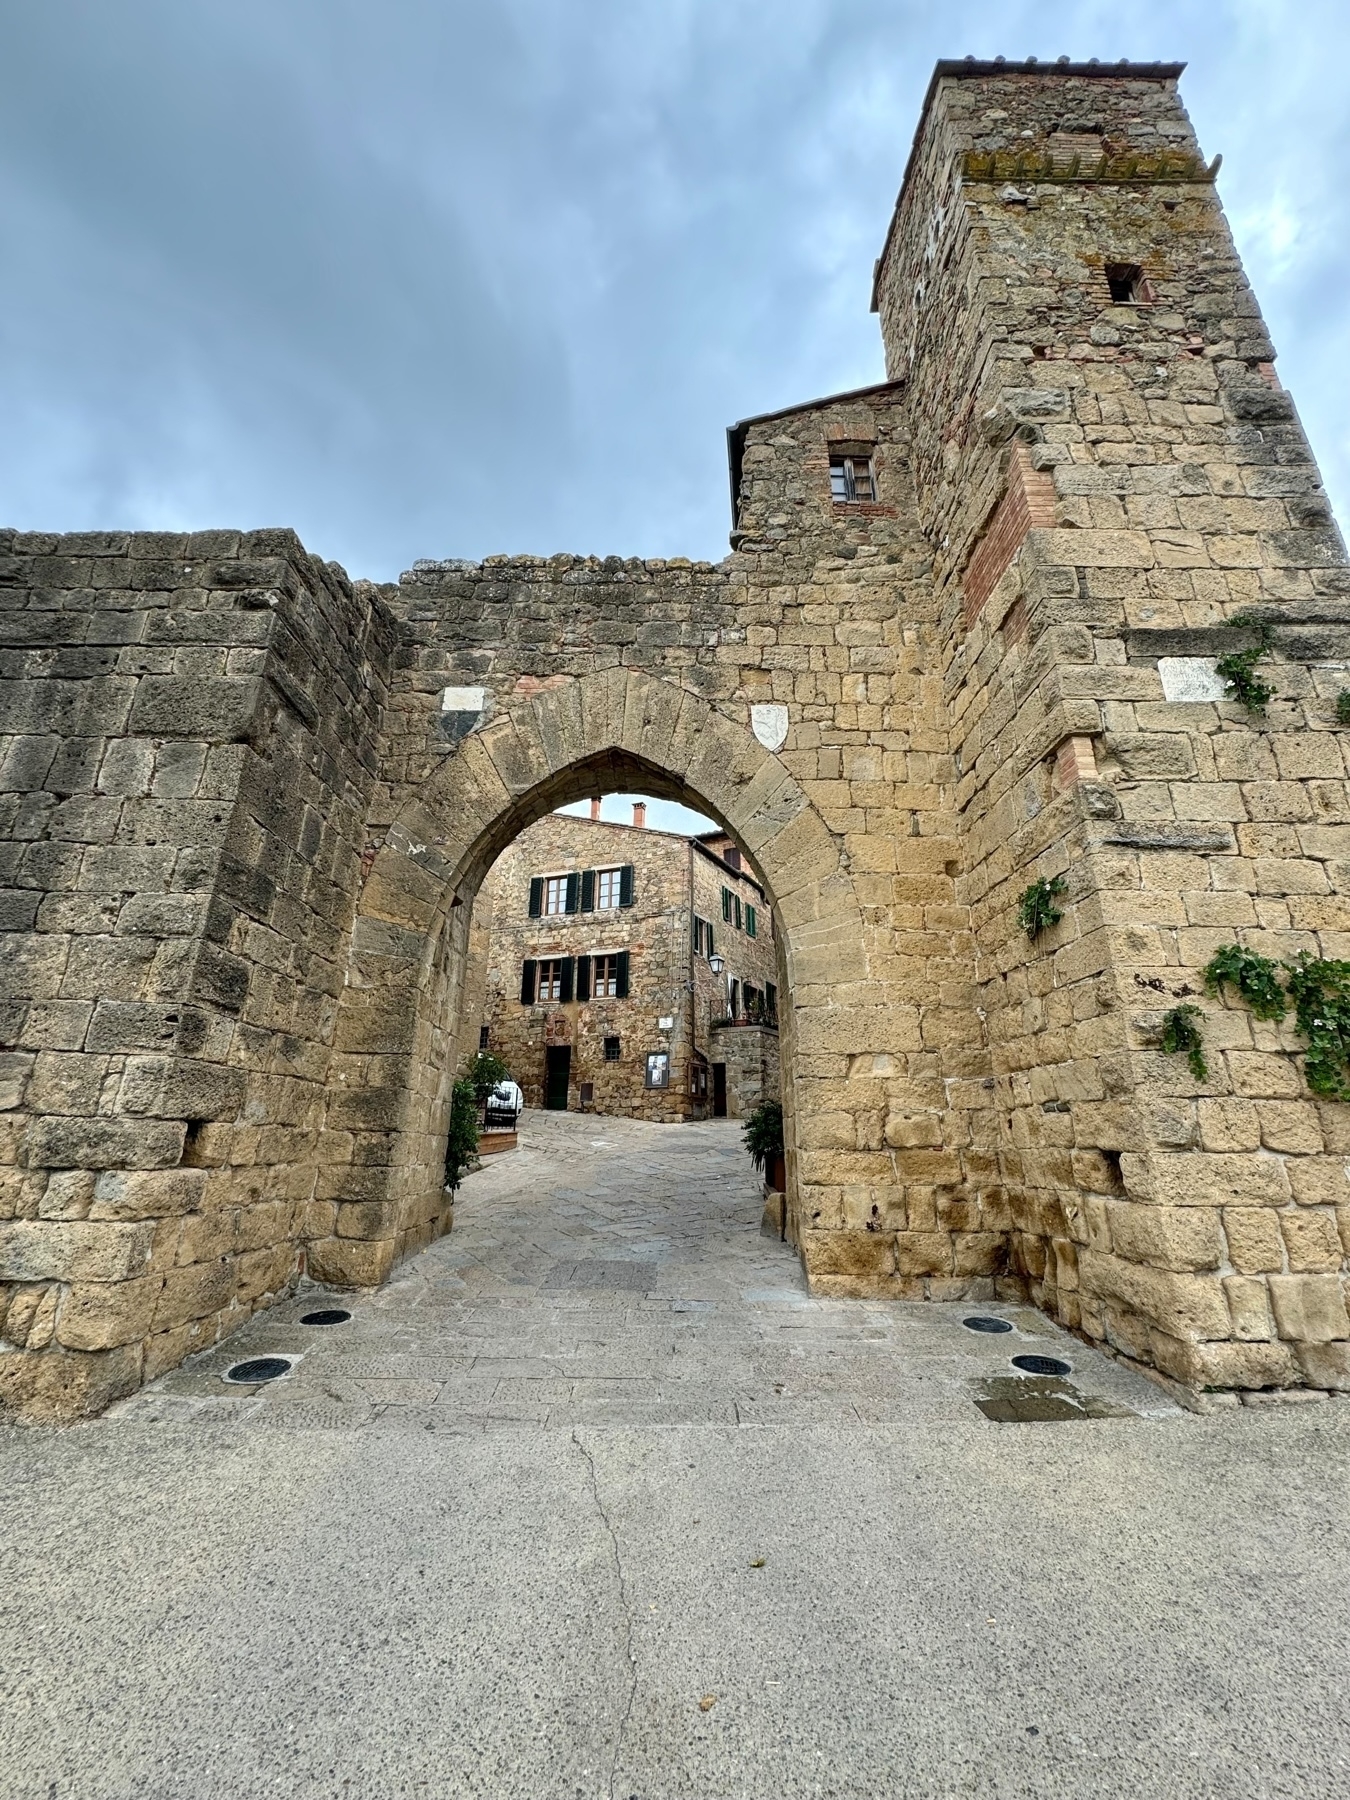 A historic stone archway leads into a cobblestone street lined with old buildings. The cloudy sky adds to the rustic atmosphere.